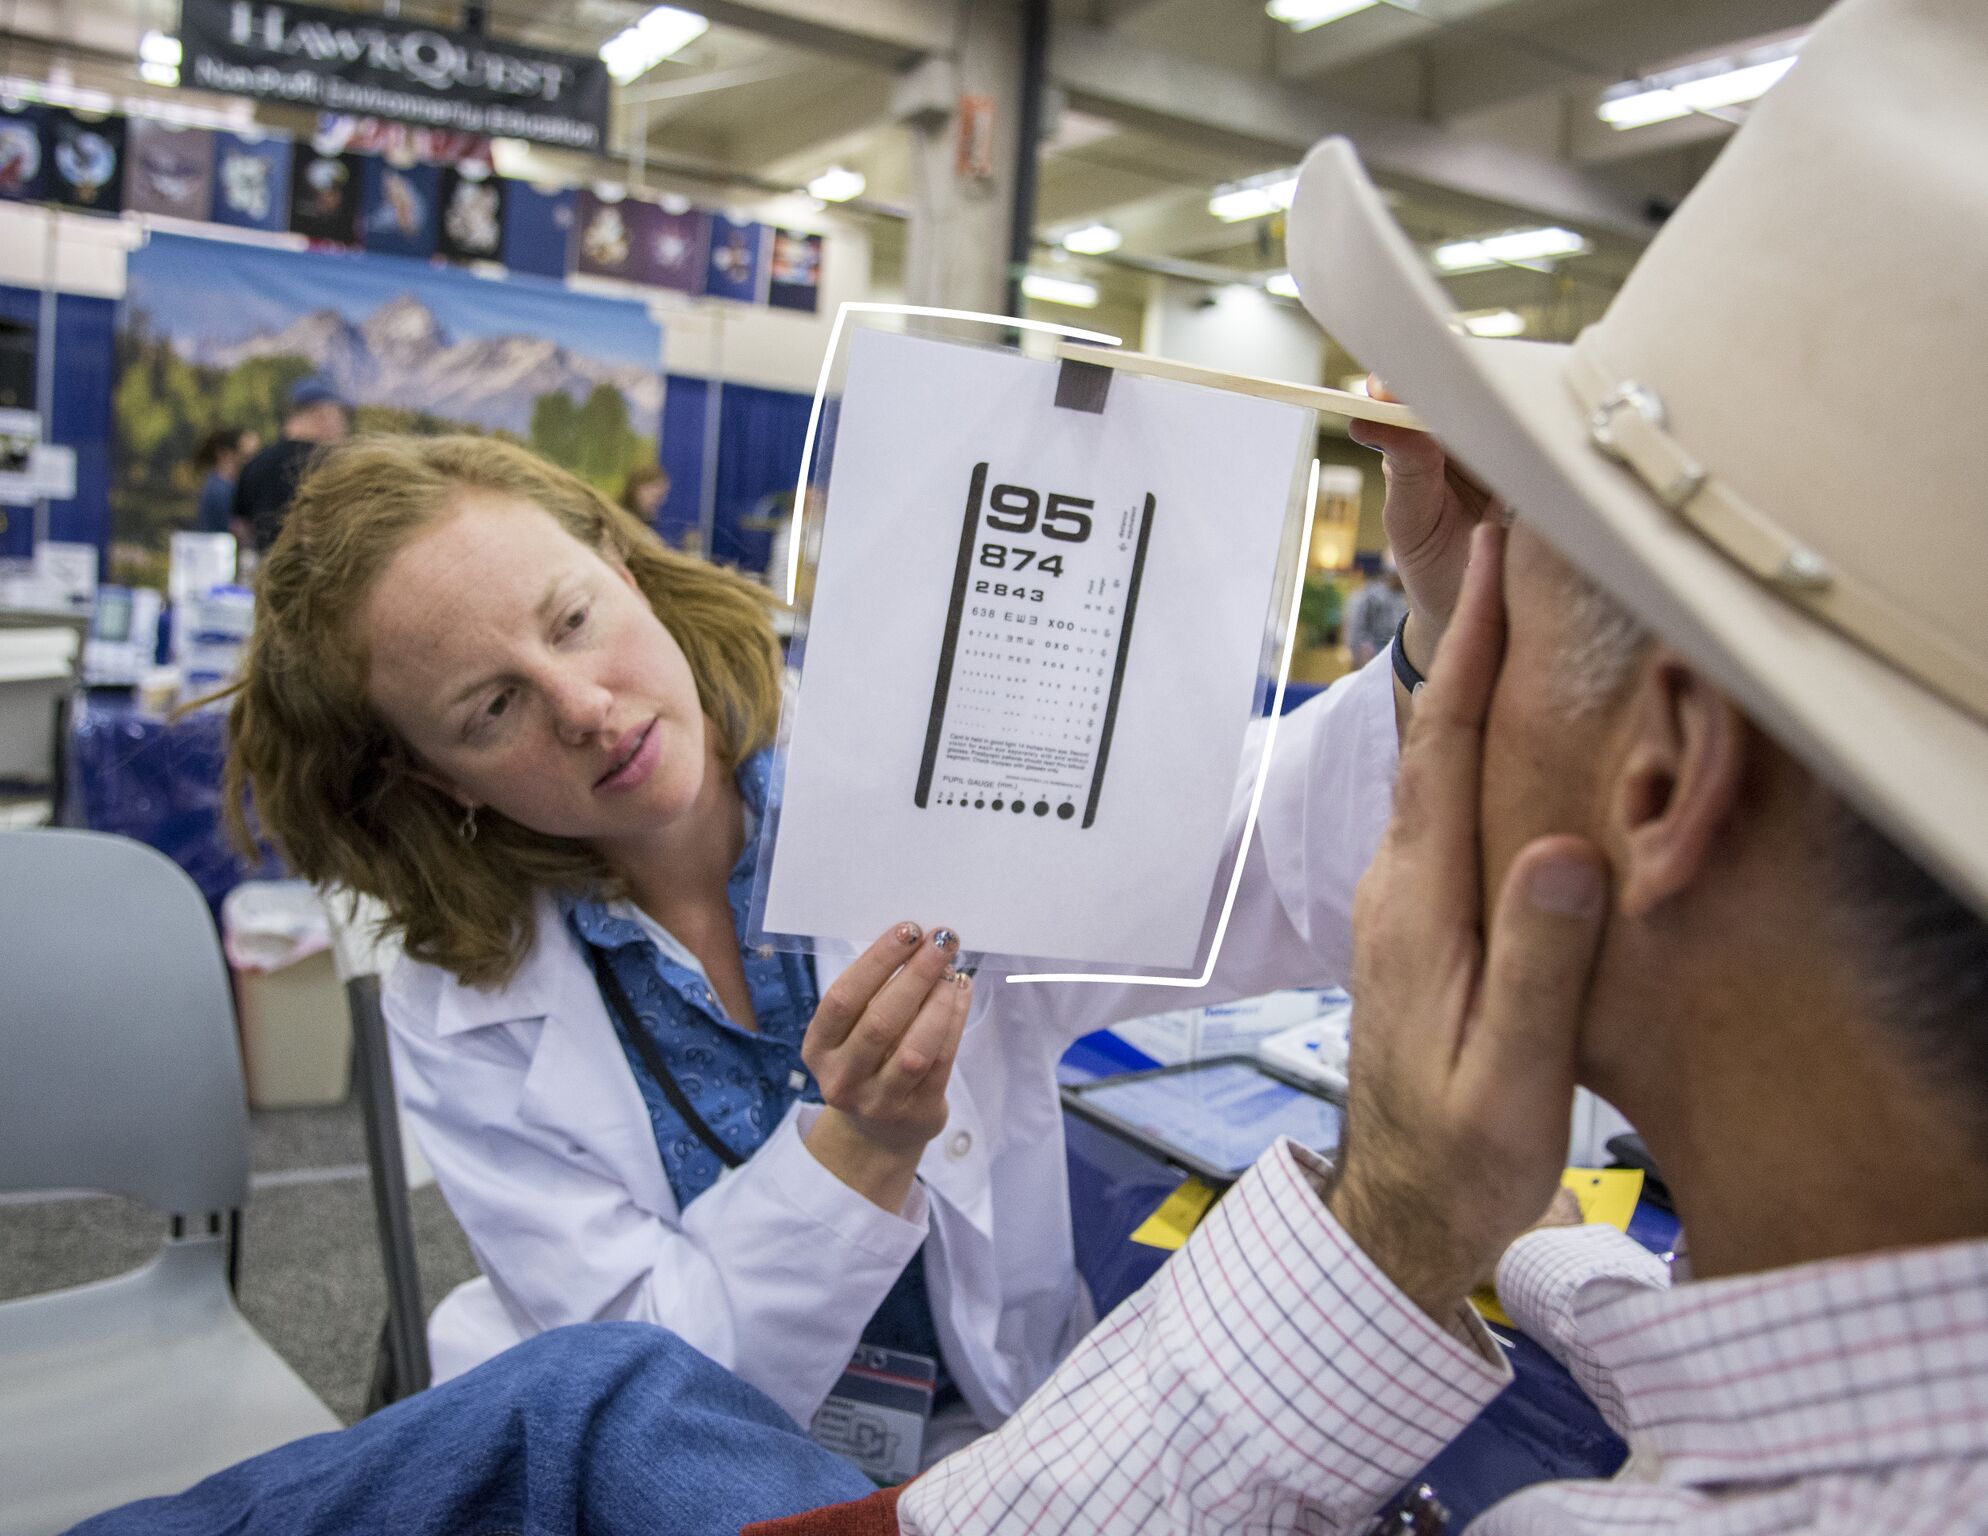 CU Anschutz will offer health screenings at the National Western Stock Show in January 2019. (Photo courtesy of CU Anschutz)